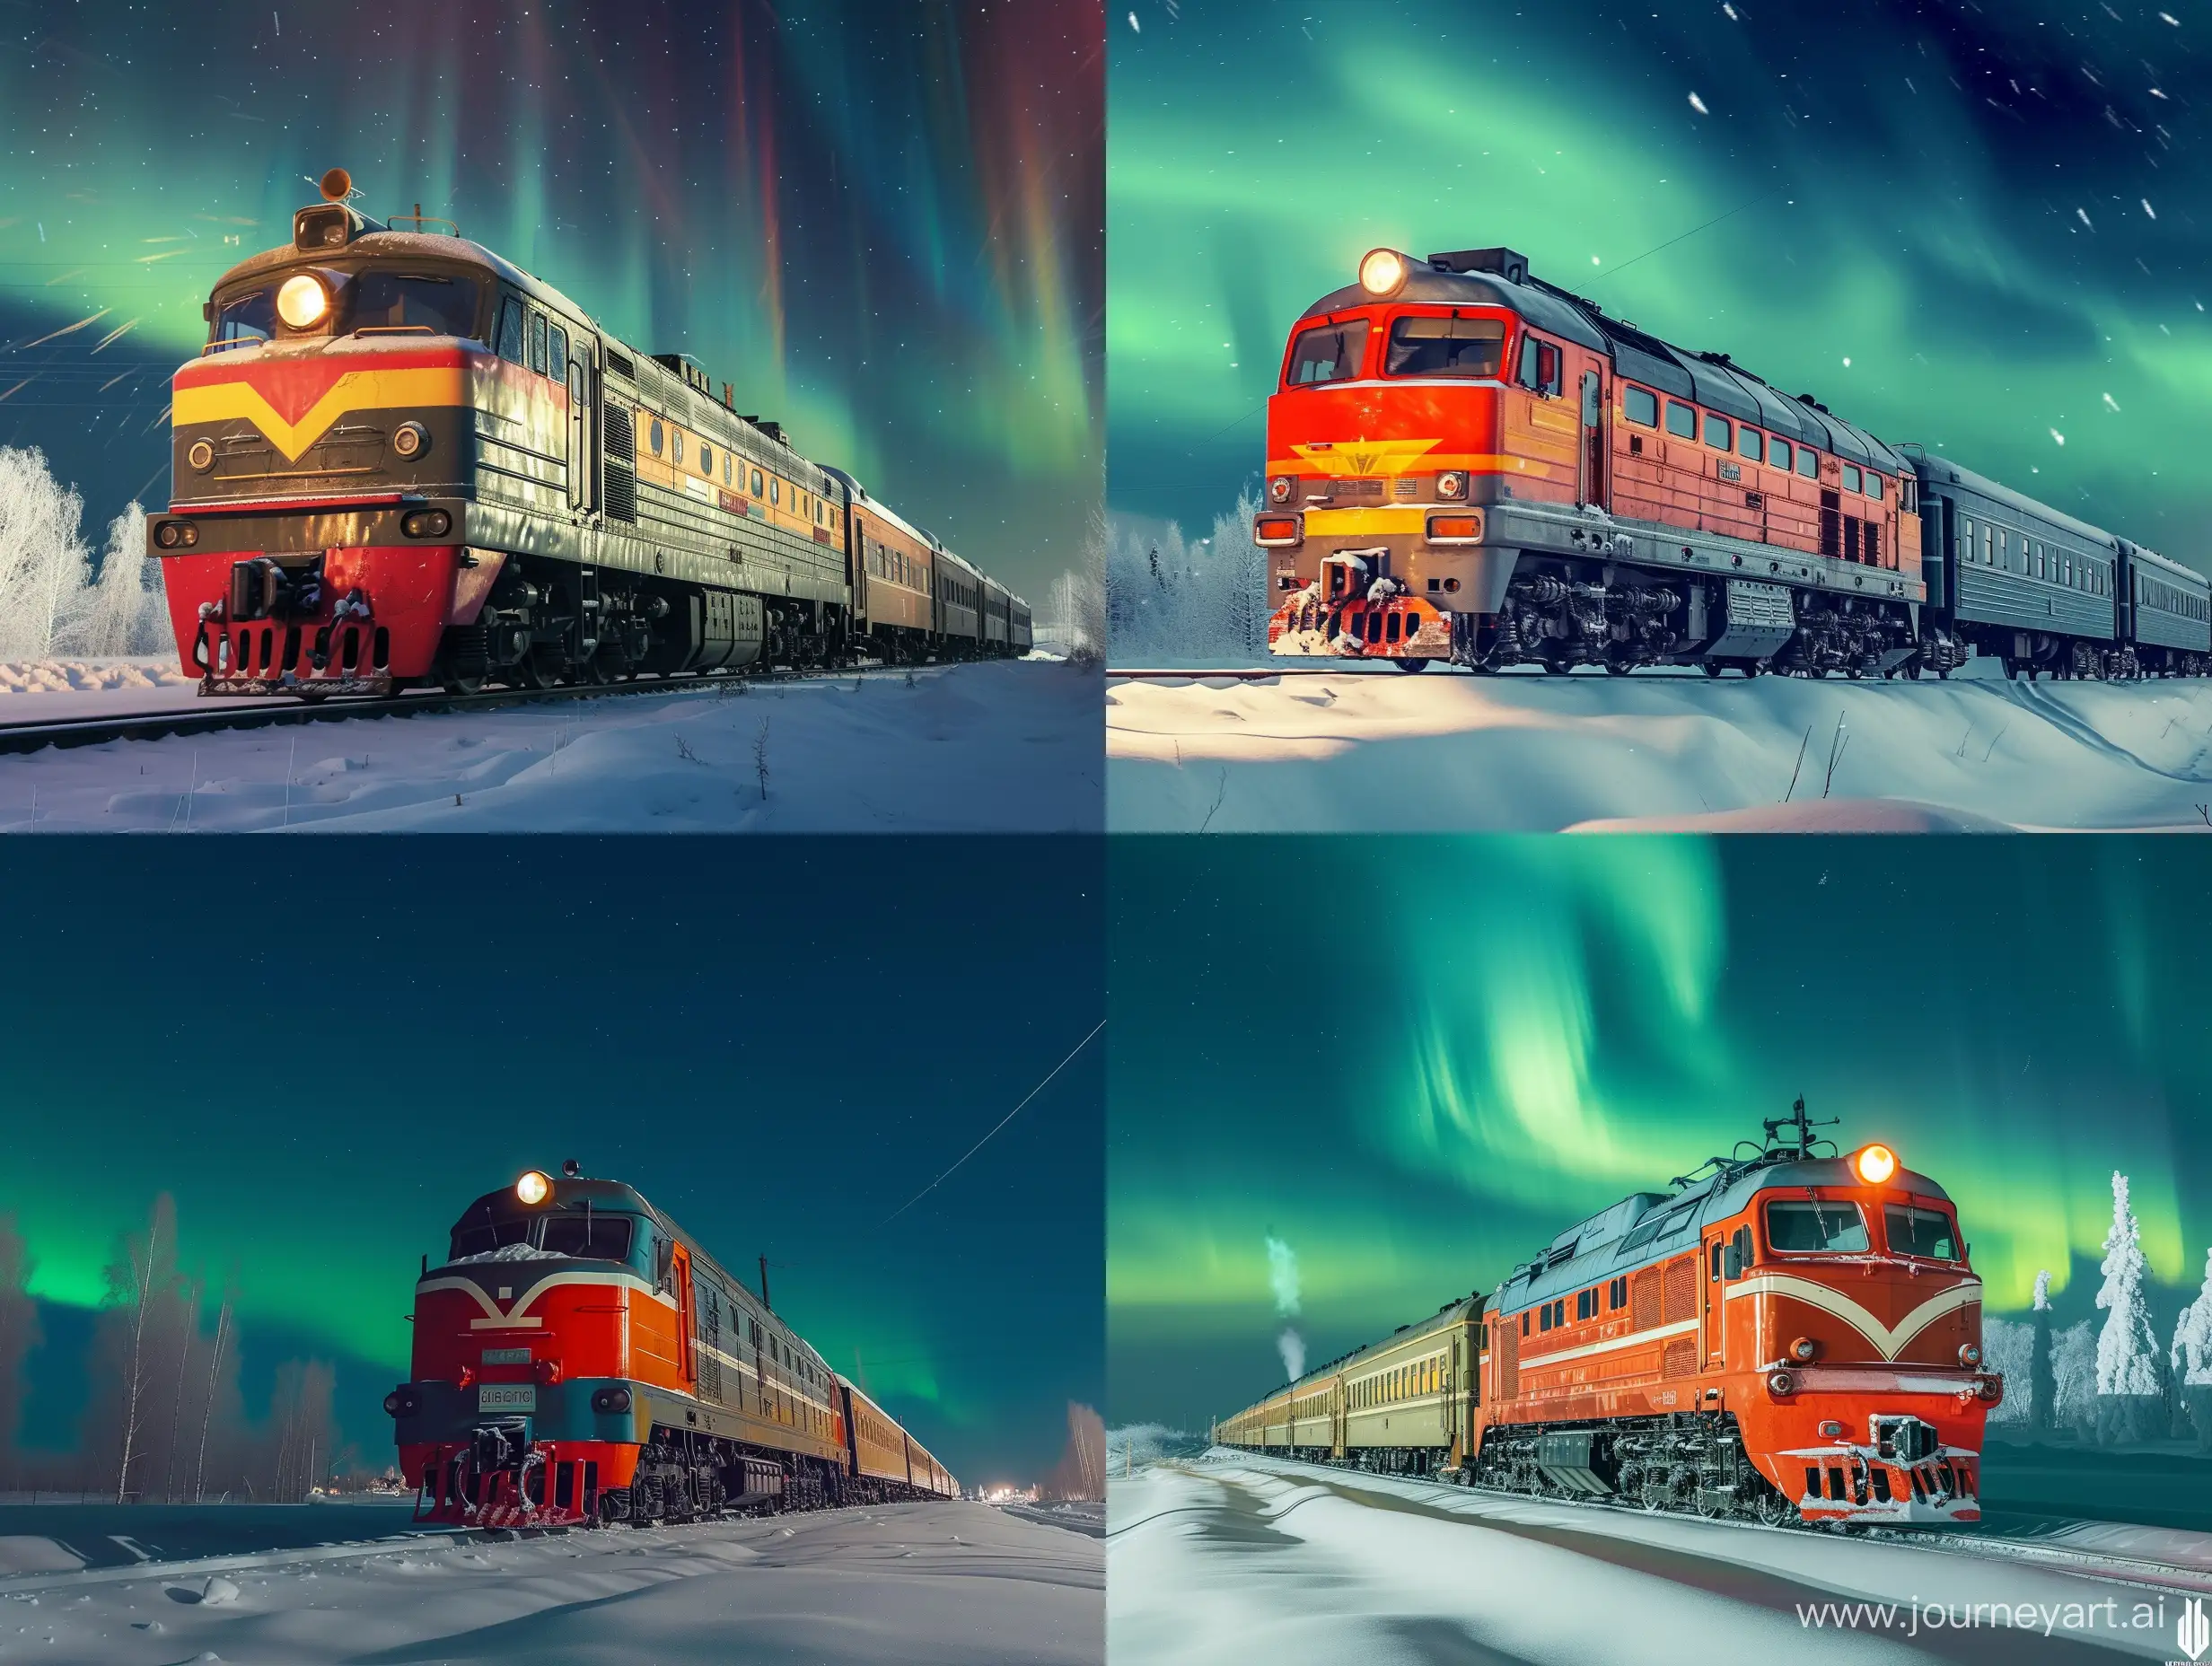 Russian diesel locomotive, new, in winter, beautiful in the snow, northern lights